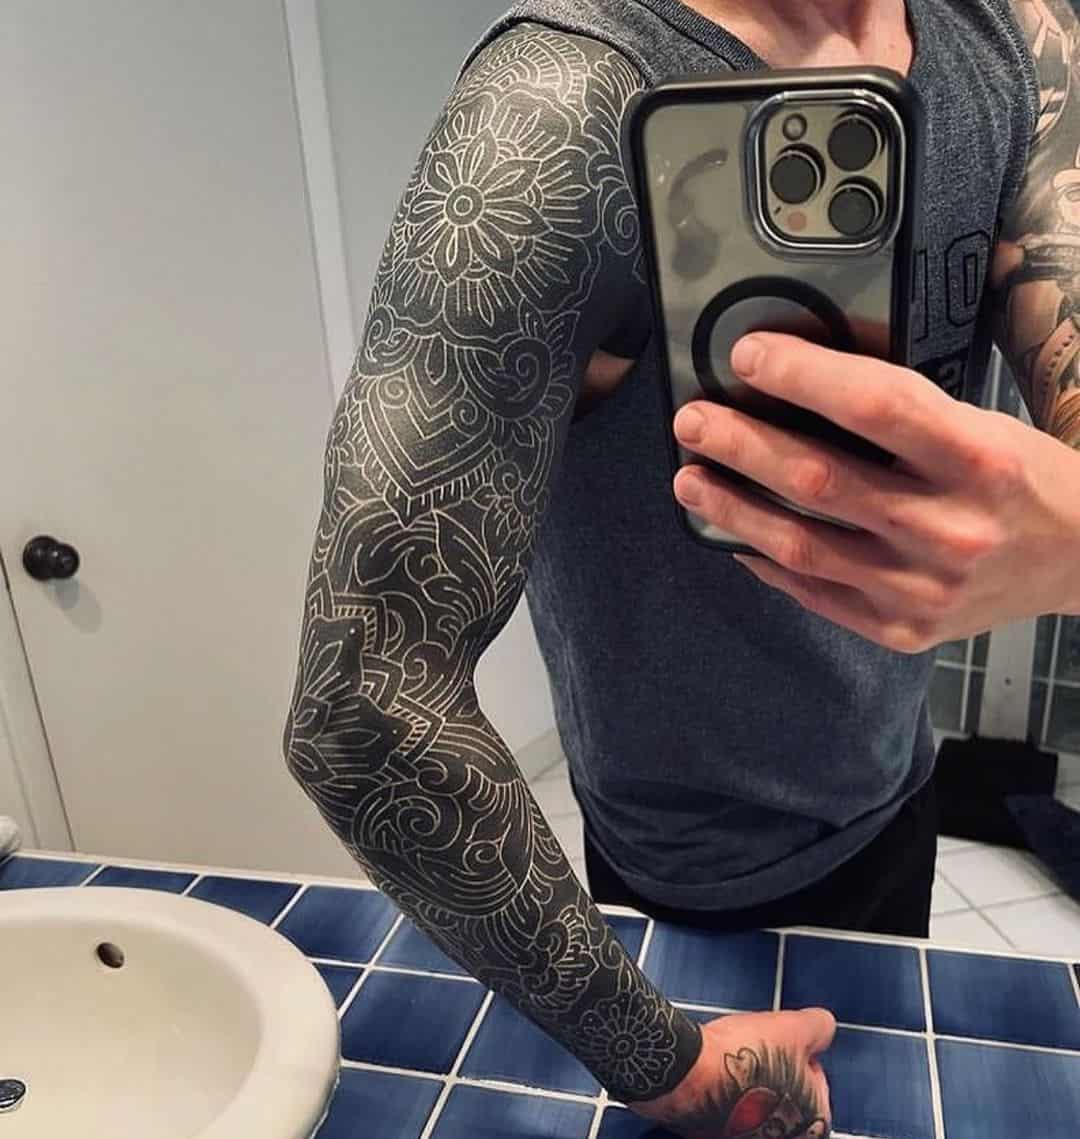 Blackout Tattoo With White Ink (Can You Use White Ink On A Blackout Tattoo?) - Saved Tattoo